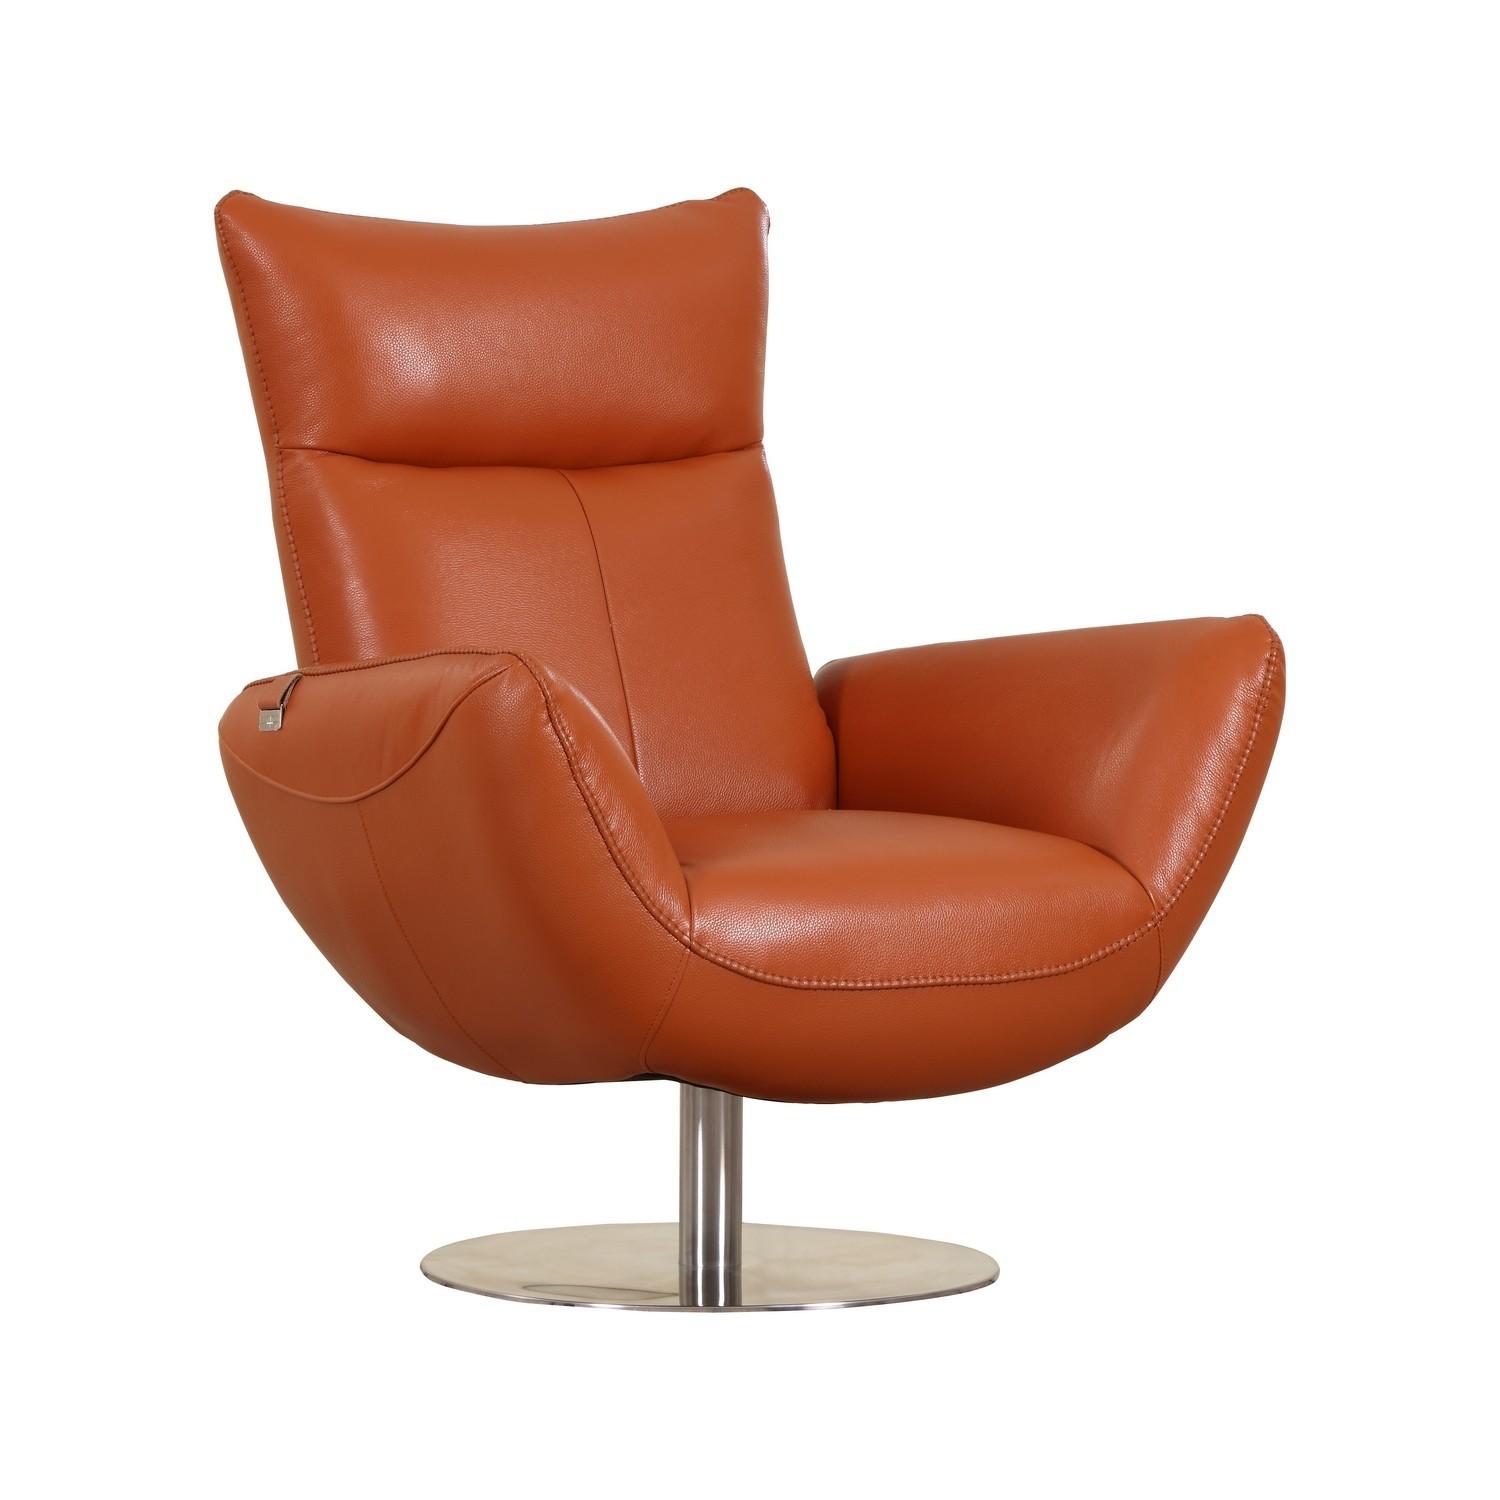 Contemporary Lounge Chair Jesse 624-CAM in Camel Italian Leather